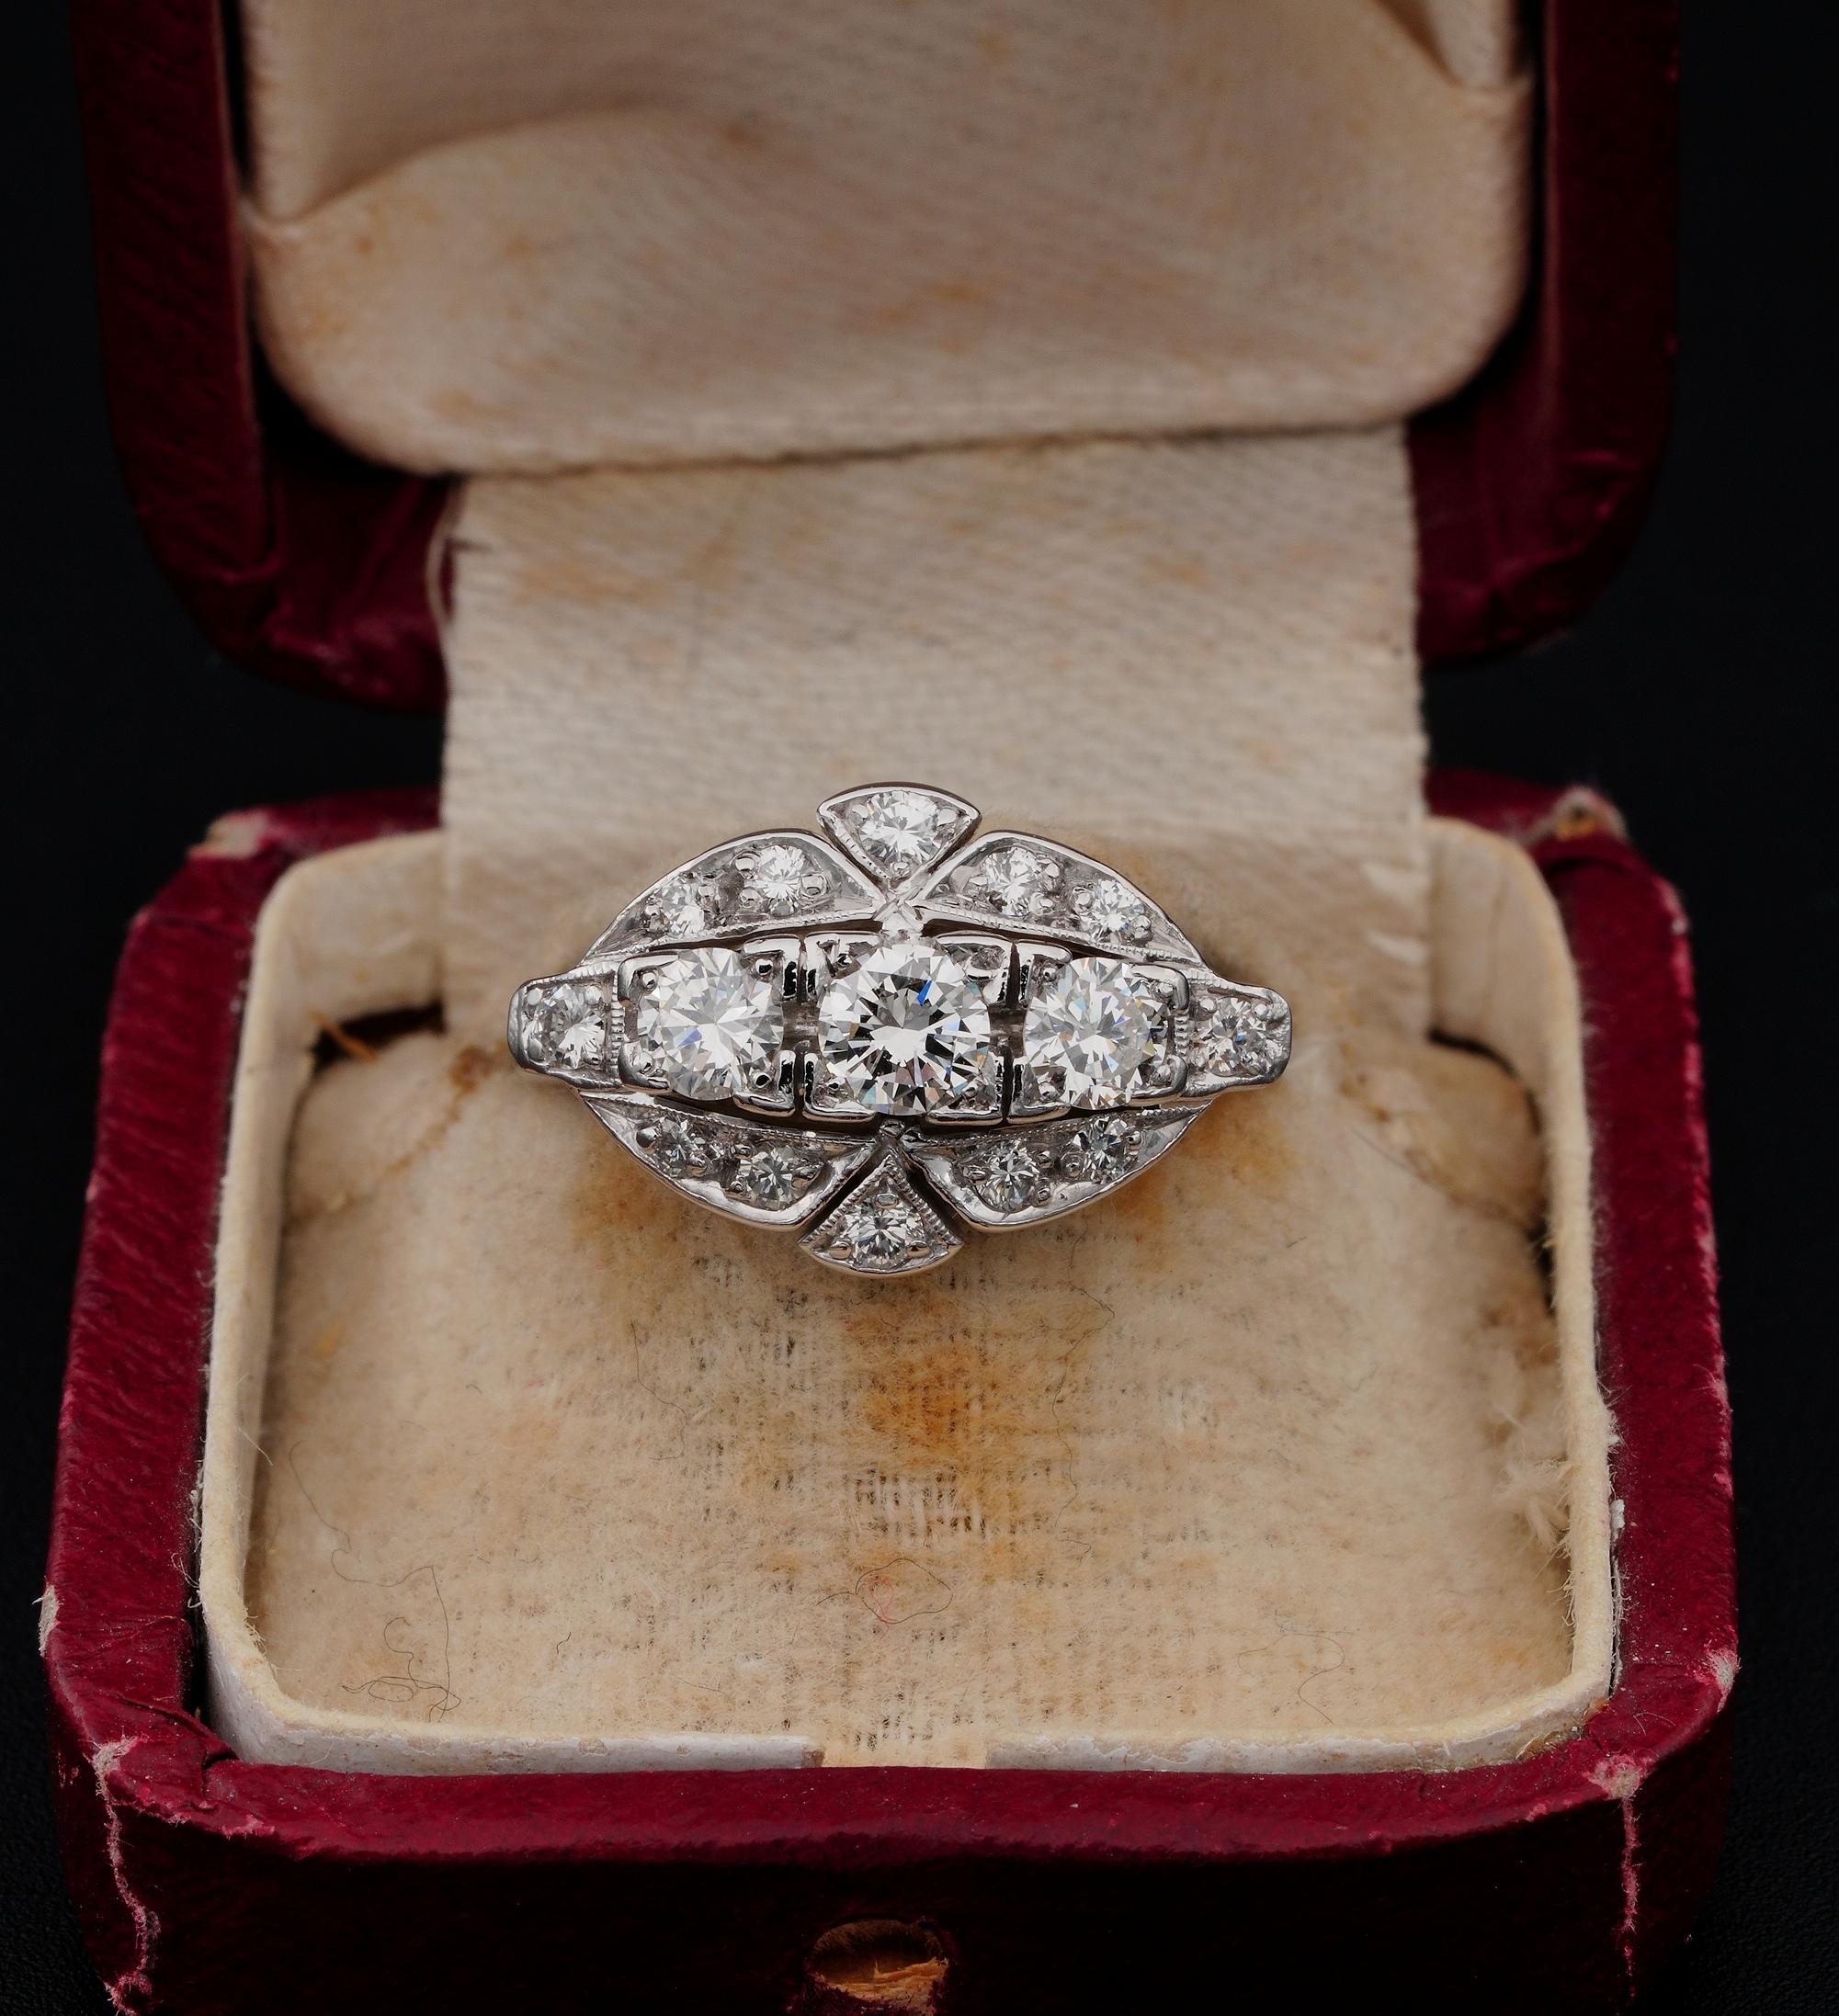 Dazzling rare Boat or Navette ring
This outstanding Art Deco period rare navette ring catches the eyes with enormous sparkle
Distinctive in a skilfully hand created horizontal navette design, with a trio of larger Diamond set in the middle slightly